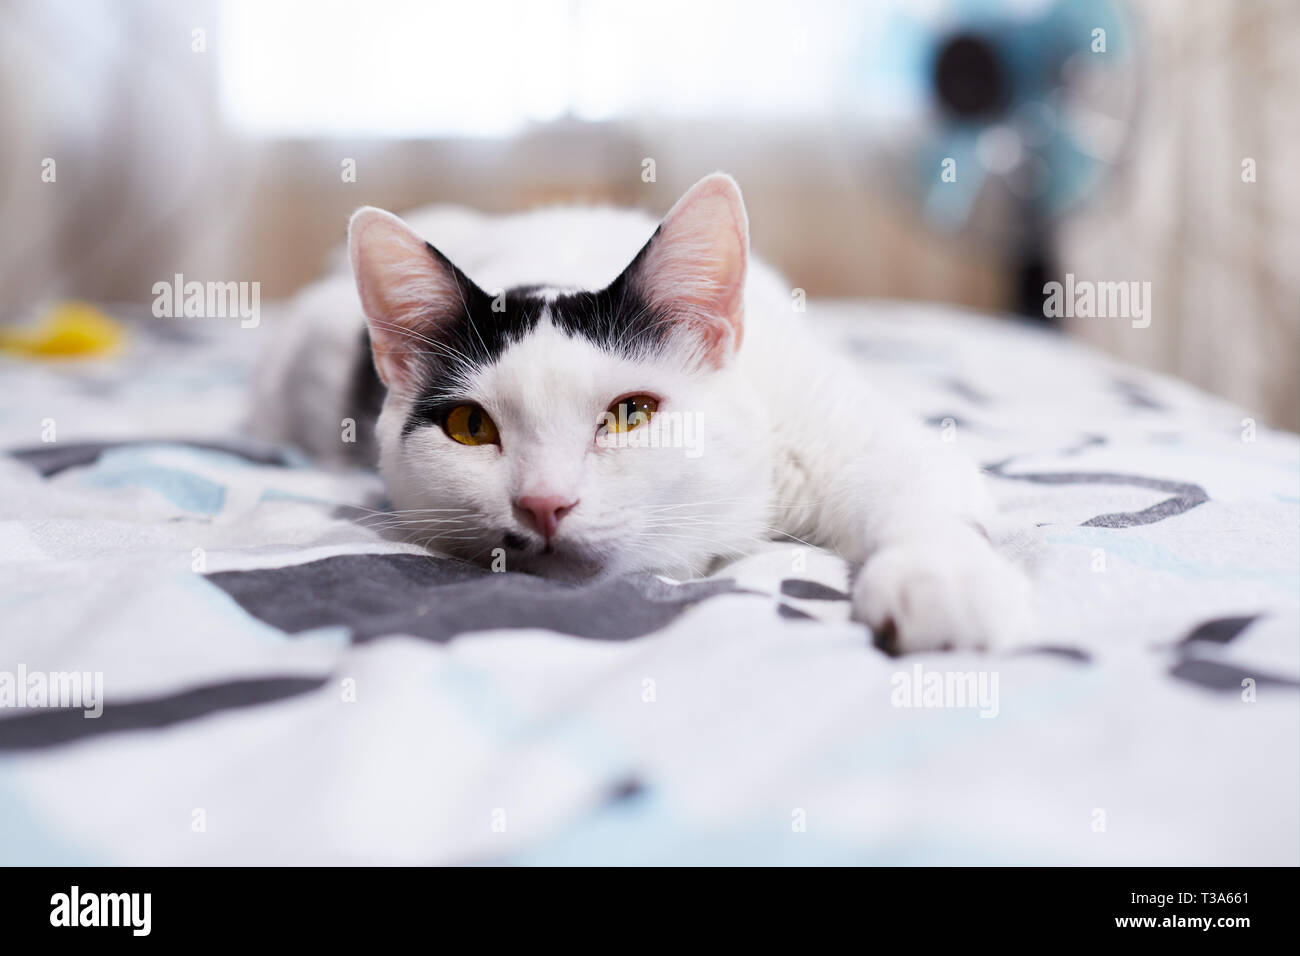 A happy and relaxed white cat with black markings and yellow eyes is lying on a bed with his paw forward Stock Photo